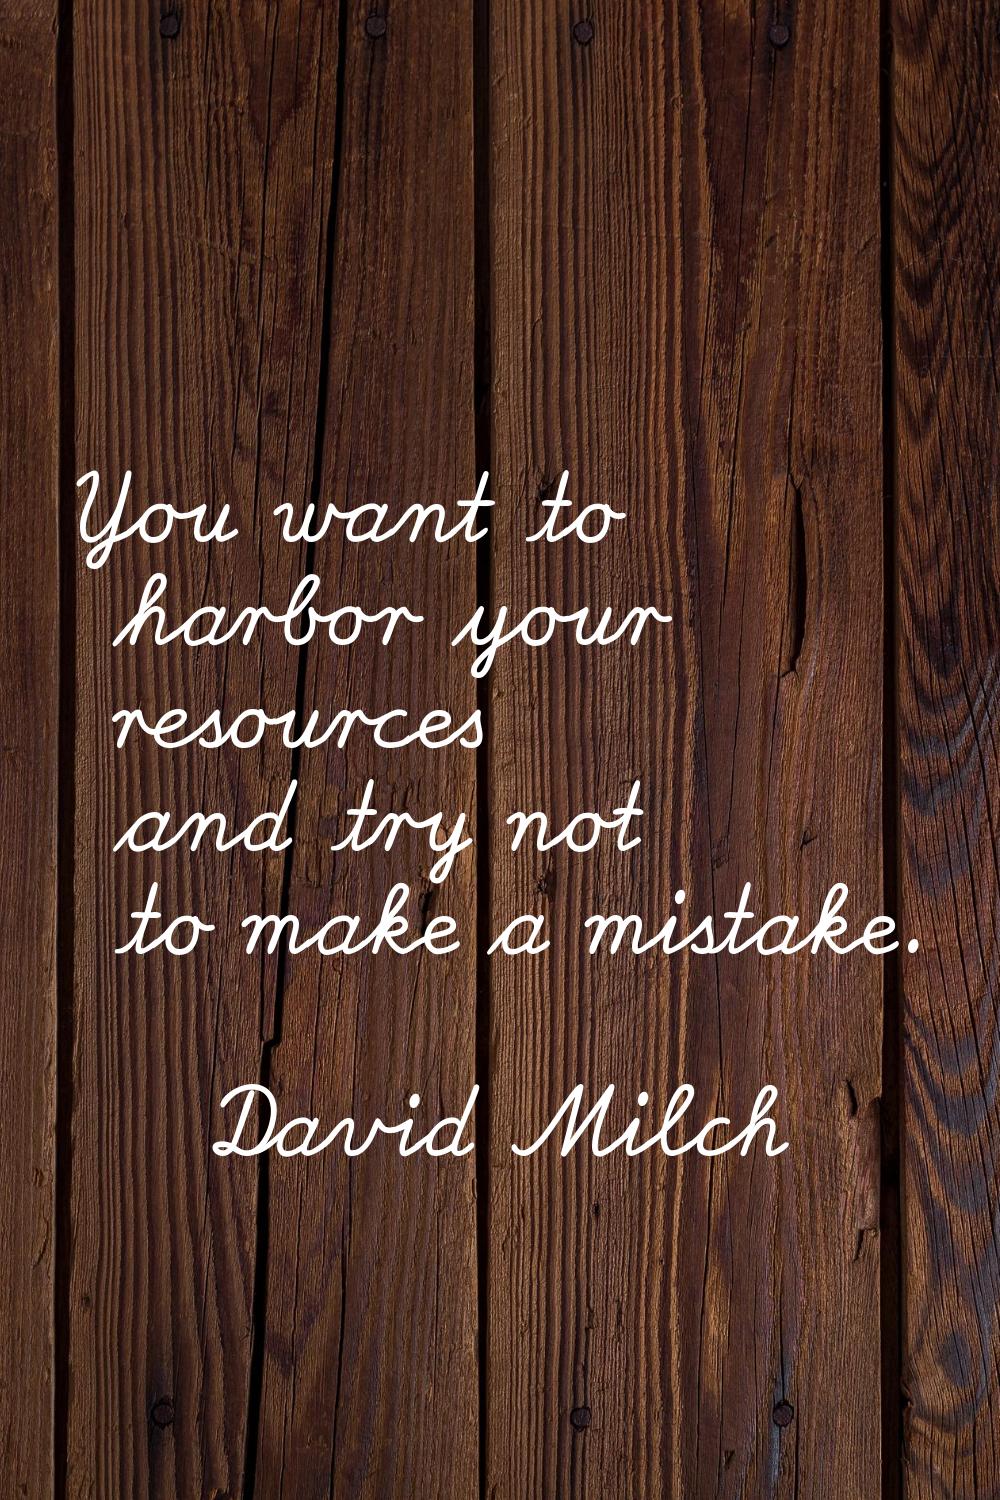 You want to harbor your resources and try not to make a mistake.